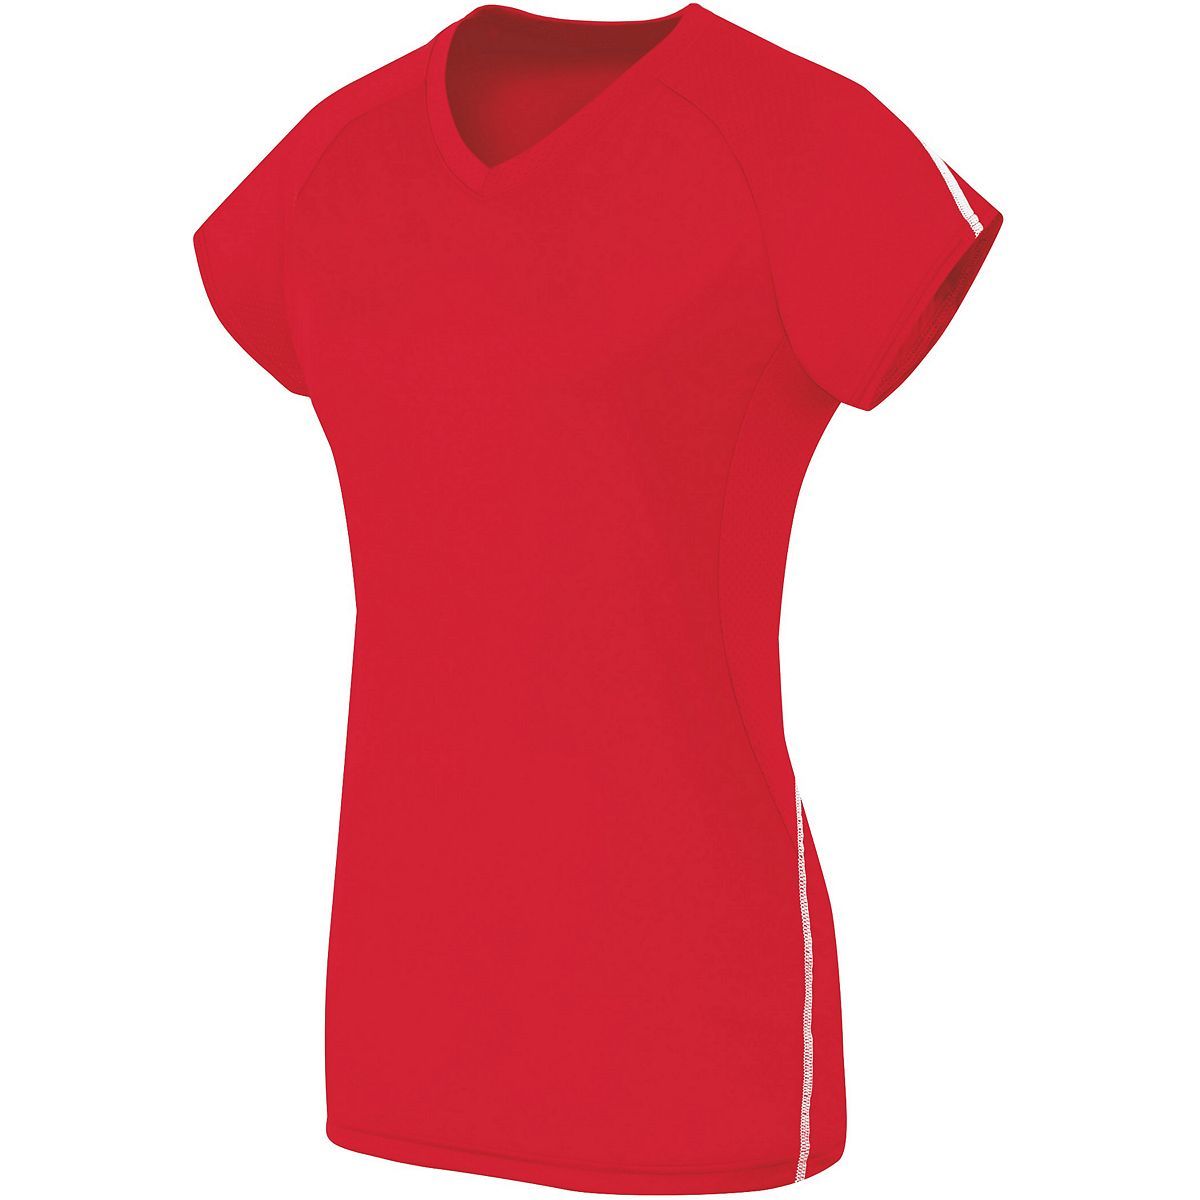 High 5 Ladies Short Sleeve Solid Jersey in Scarlet/White  -Part of the Ladies, Ladies-Jersey, High5-Products, Volleyball, Shirts product lines at KanaleyCreations.com